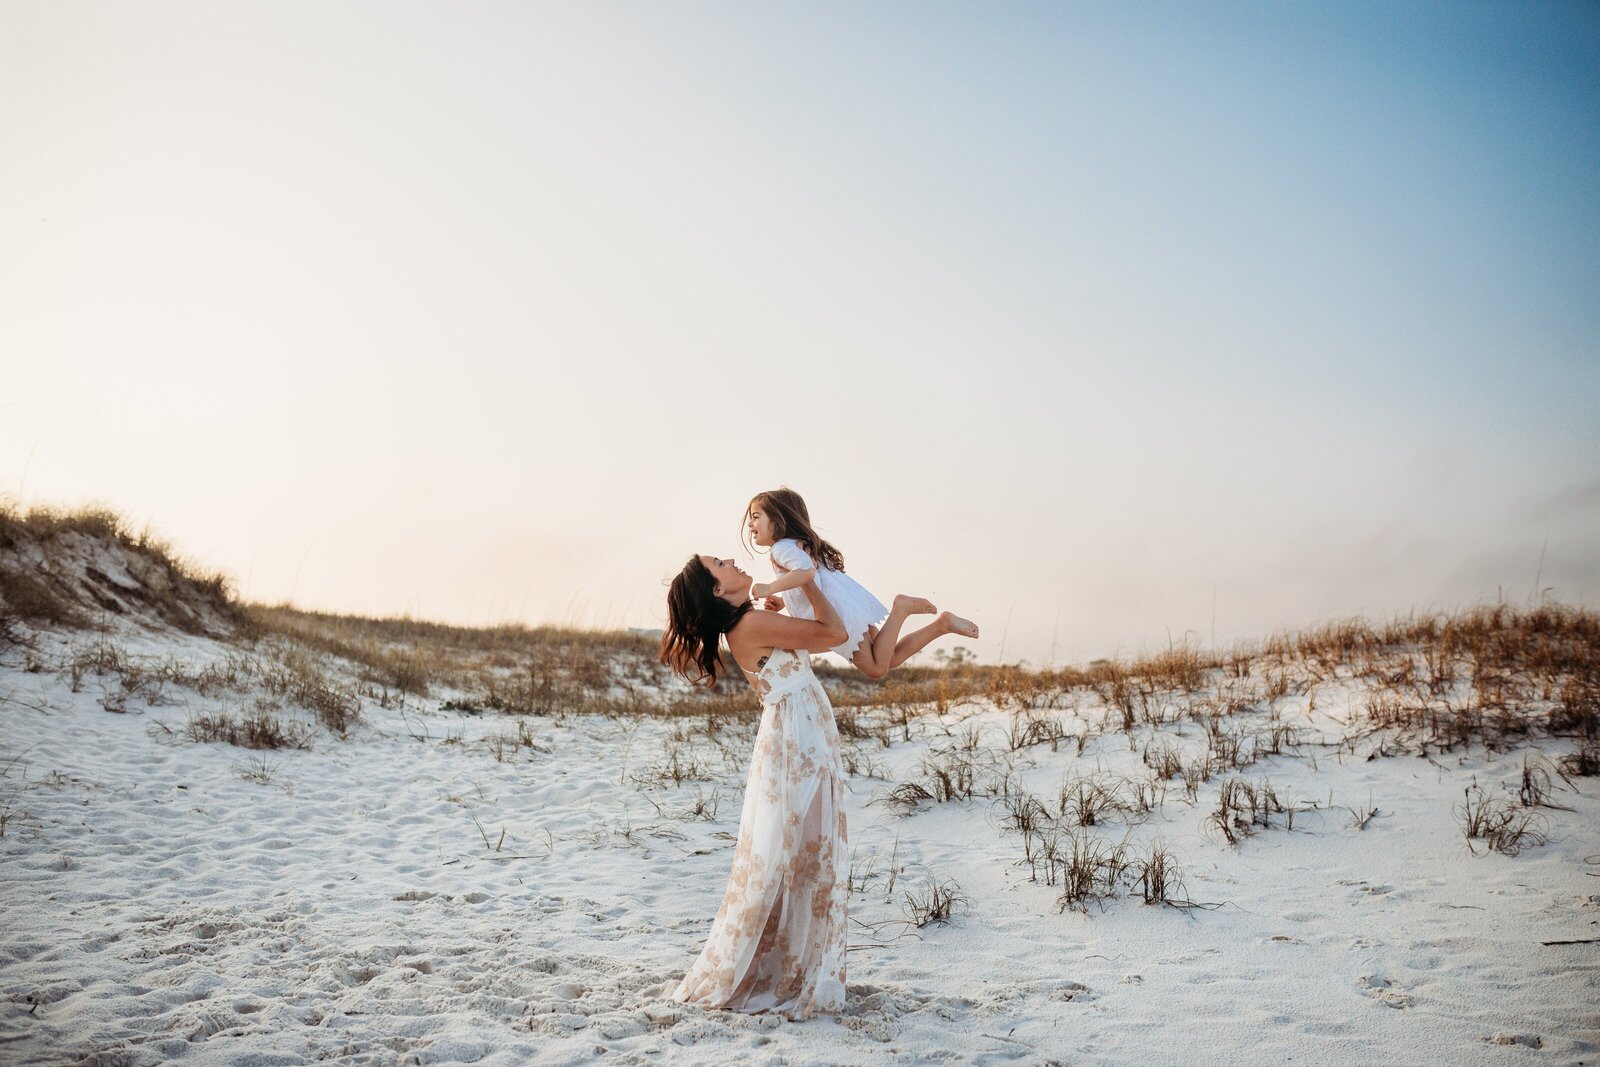 Pensacola Family Photography by Jennifer Beal Photography. Mother and daughter playing near sand dunes